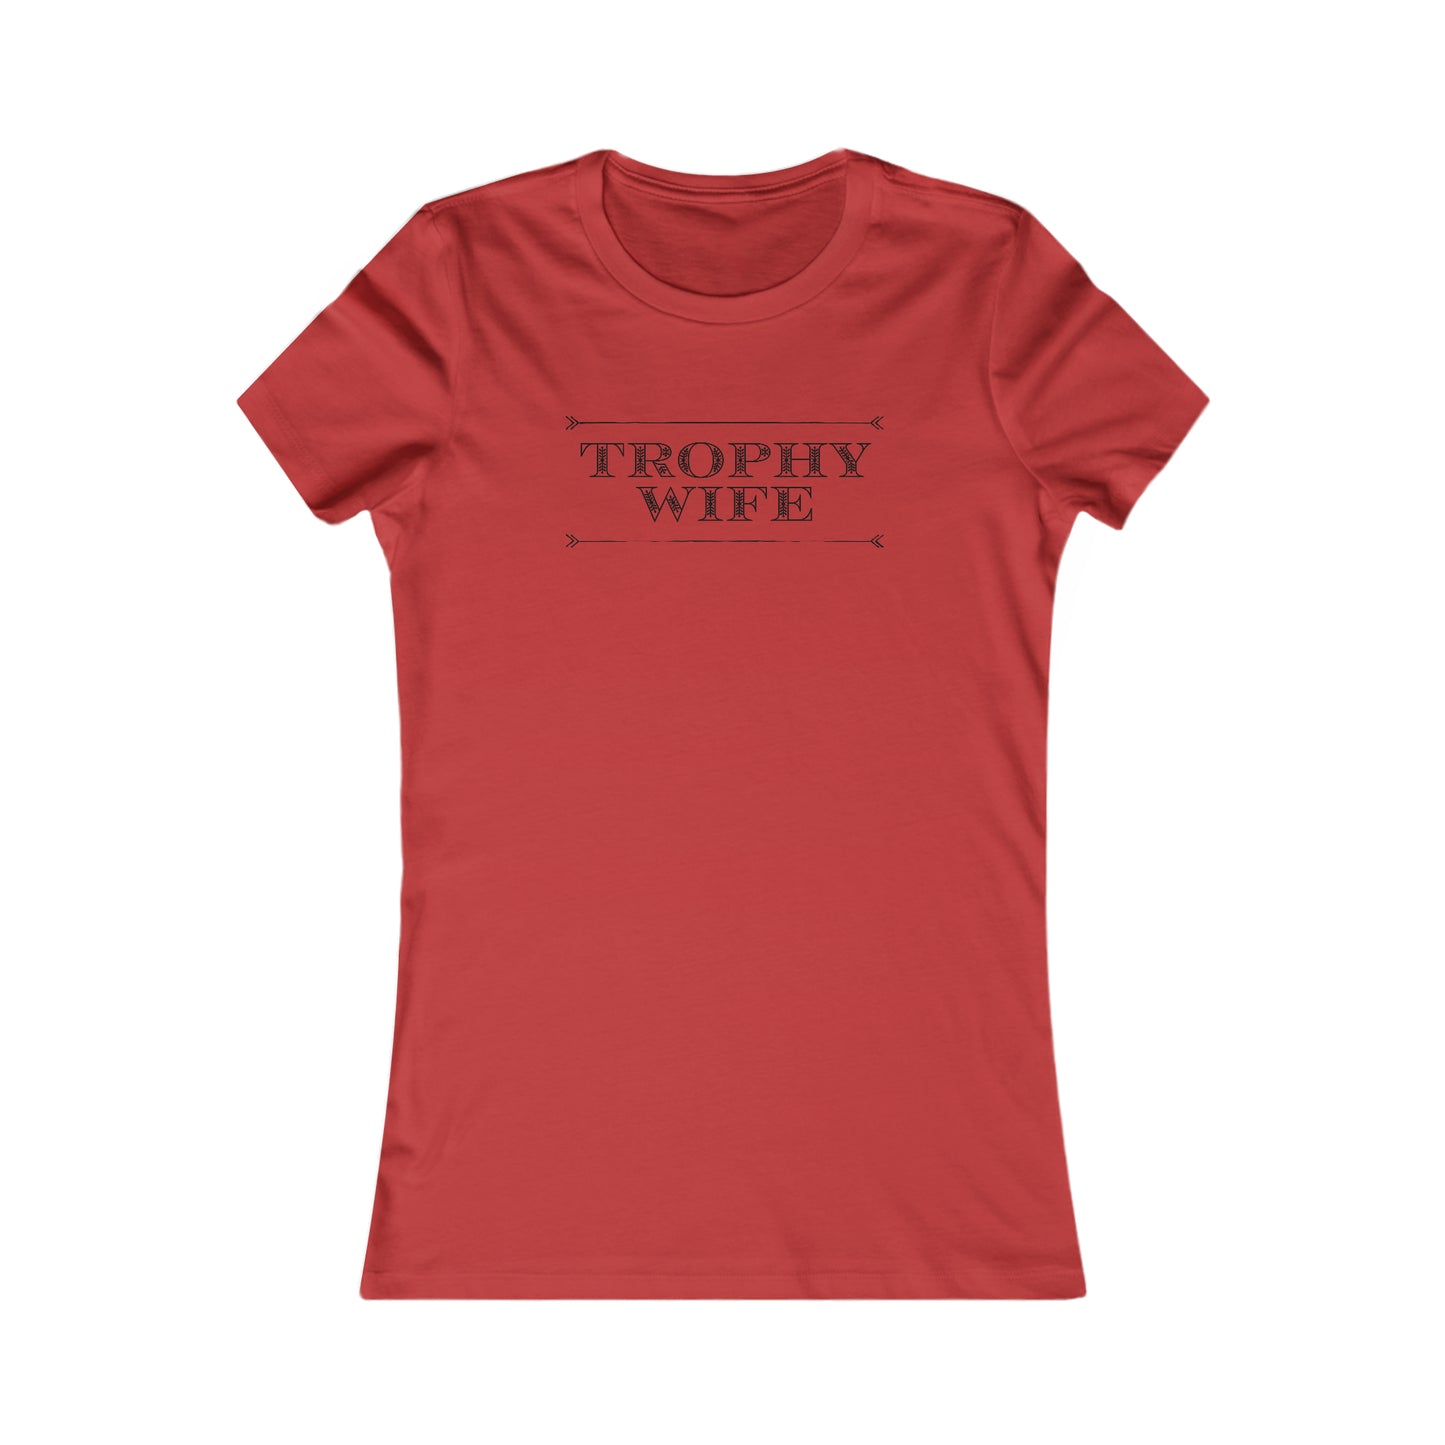 Trophy Wife T- Shirt For Best Wife T Shirt For Wifey TShirt For Funny Wife Gift